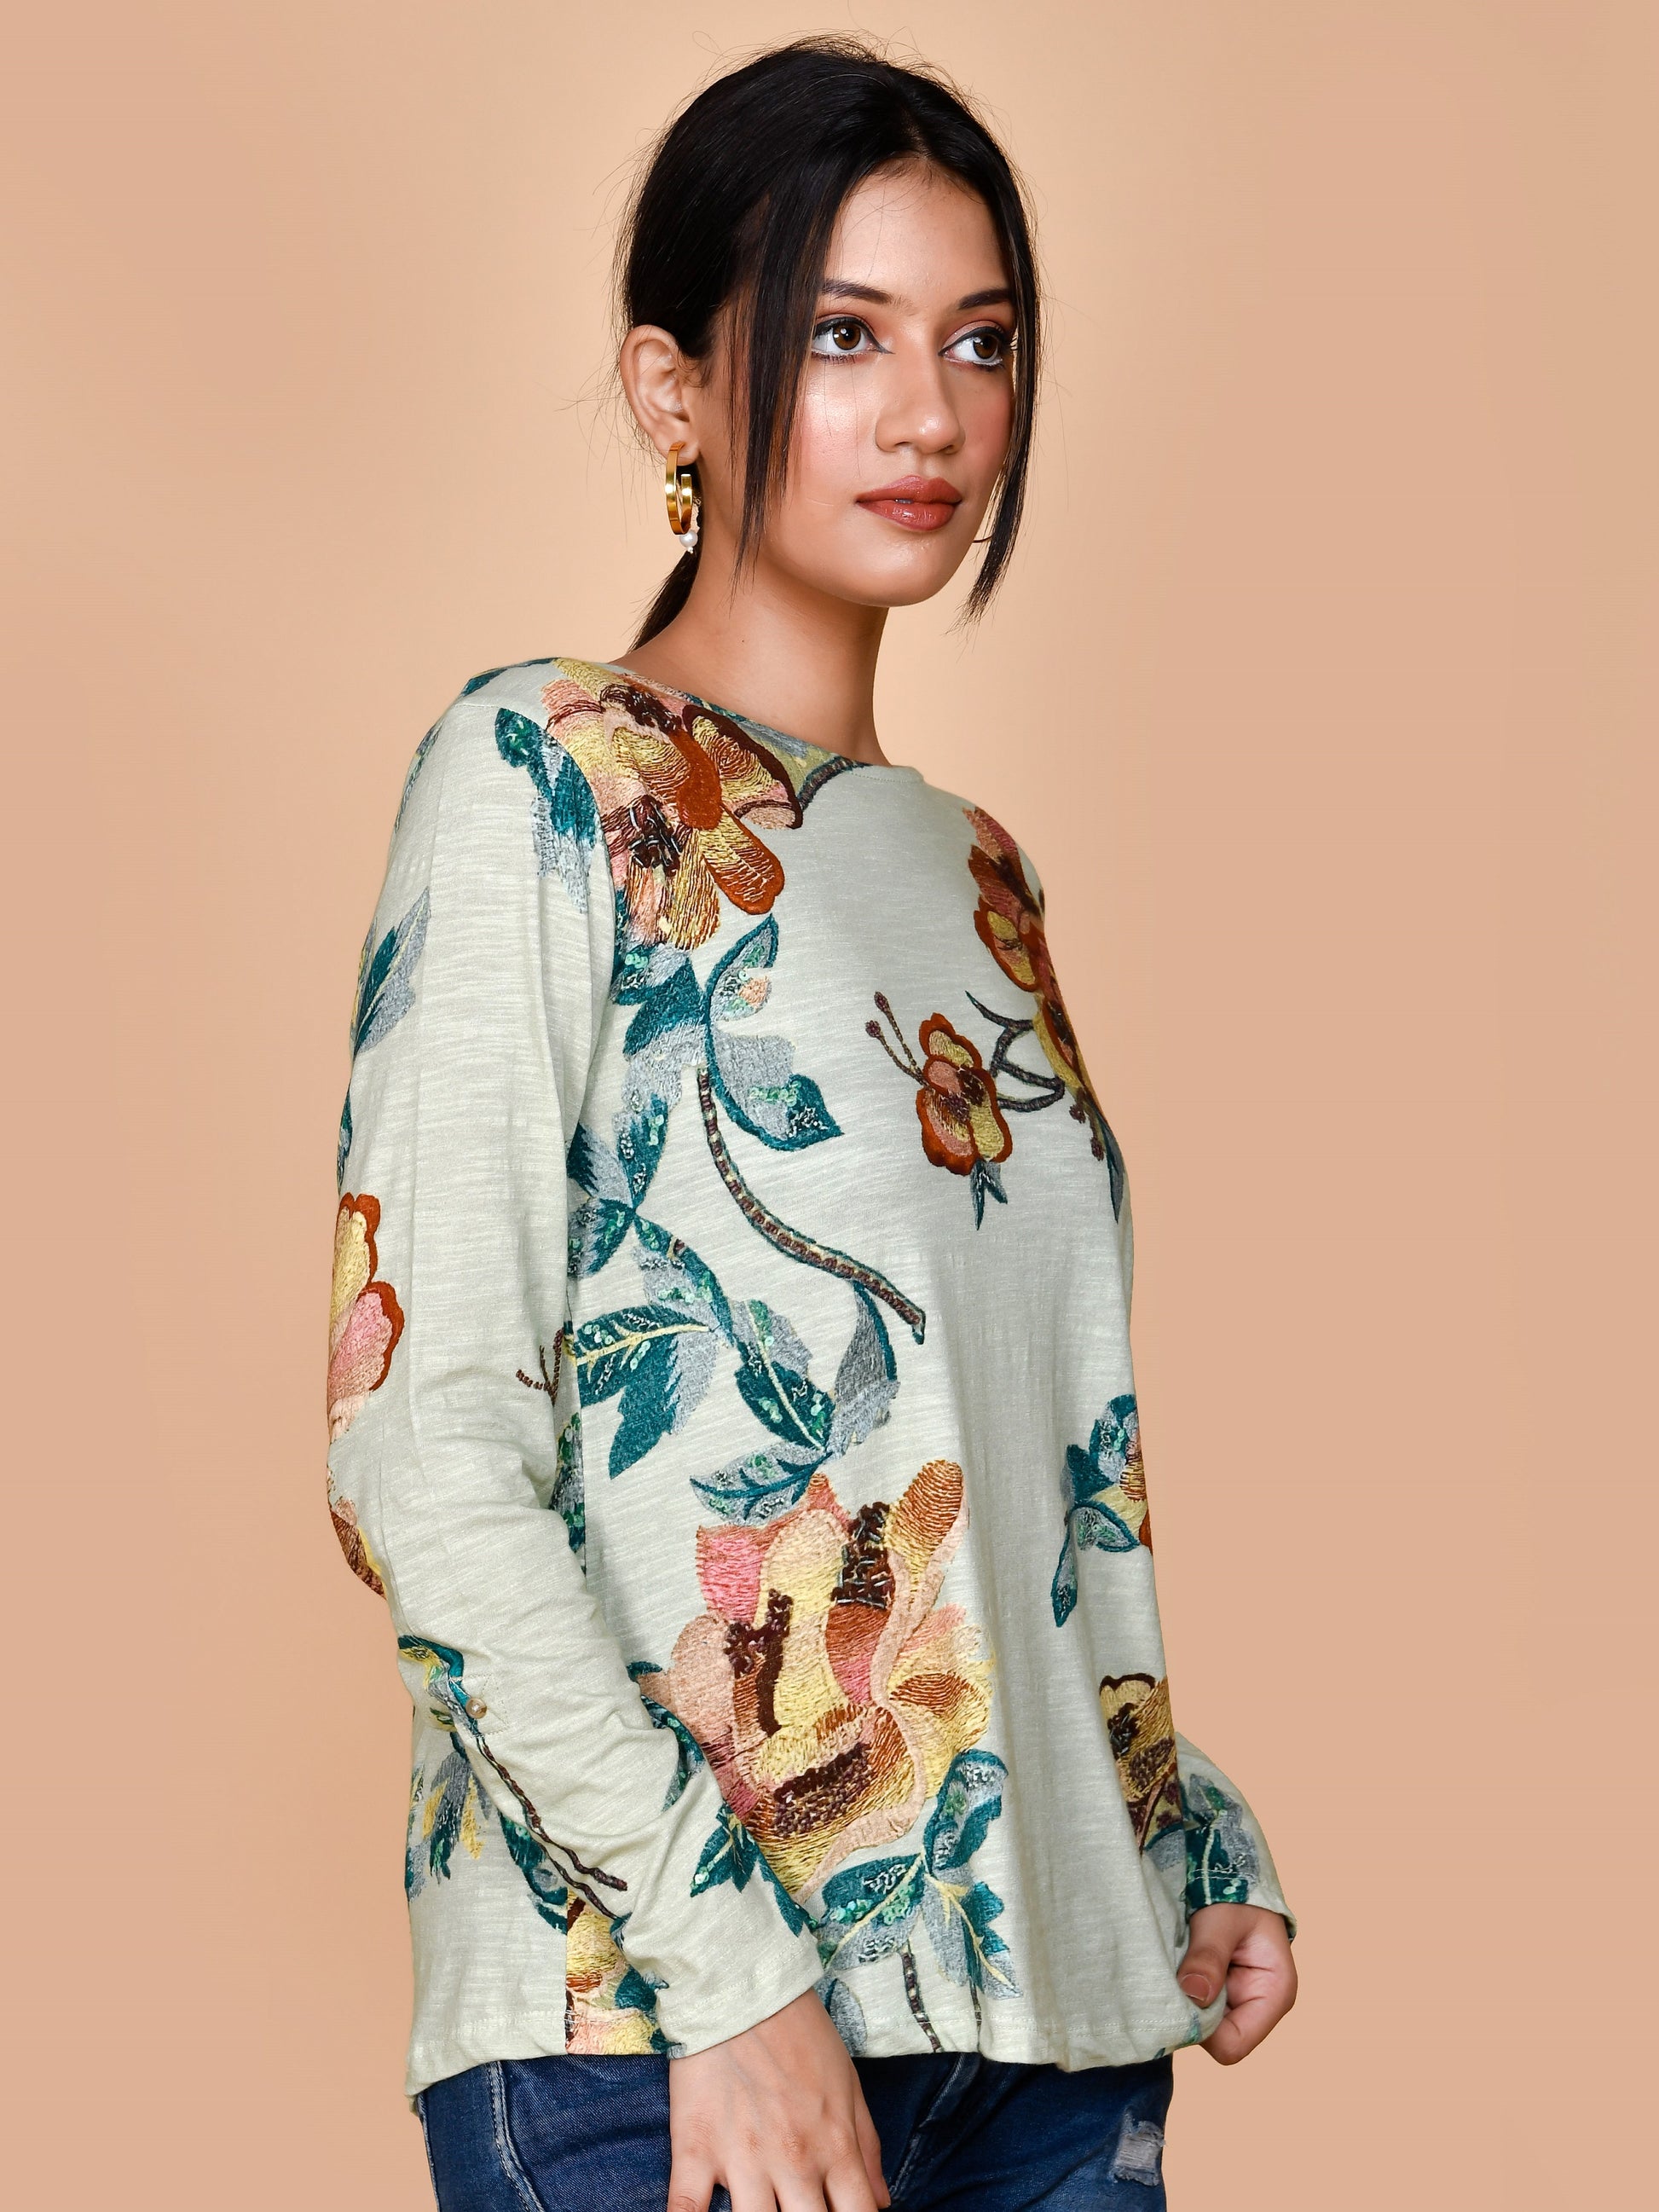 Expertly crafted from Khadi cotton, this full-sleeved top combines style and comfort for girls and women. Its regular fit and full sleeves make it perfect for any occasion. Made from high-quality materials, this top is not only durable but also environmentally friendly. Elevate your wardrobe with this timeless pie